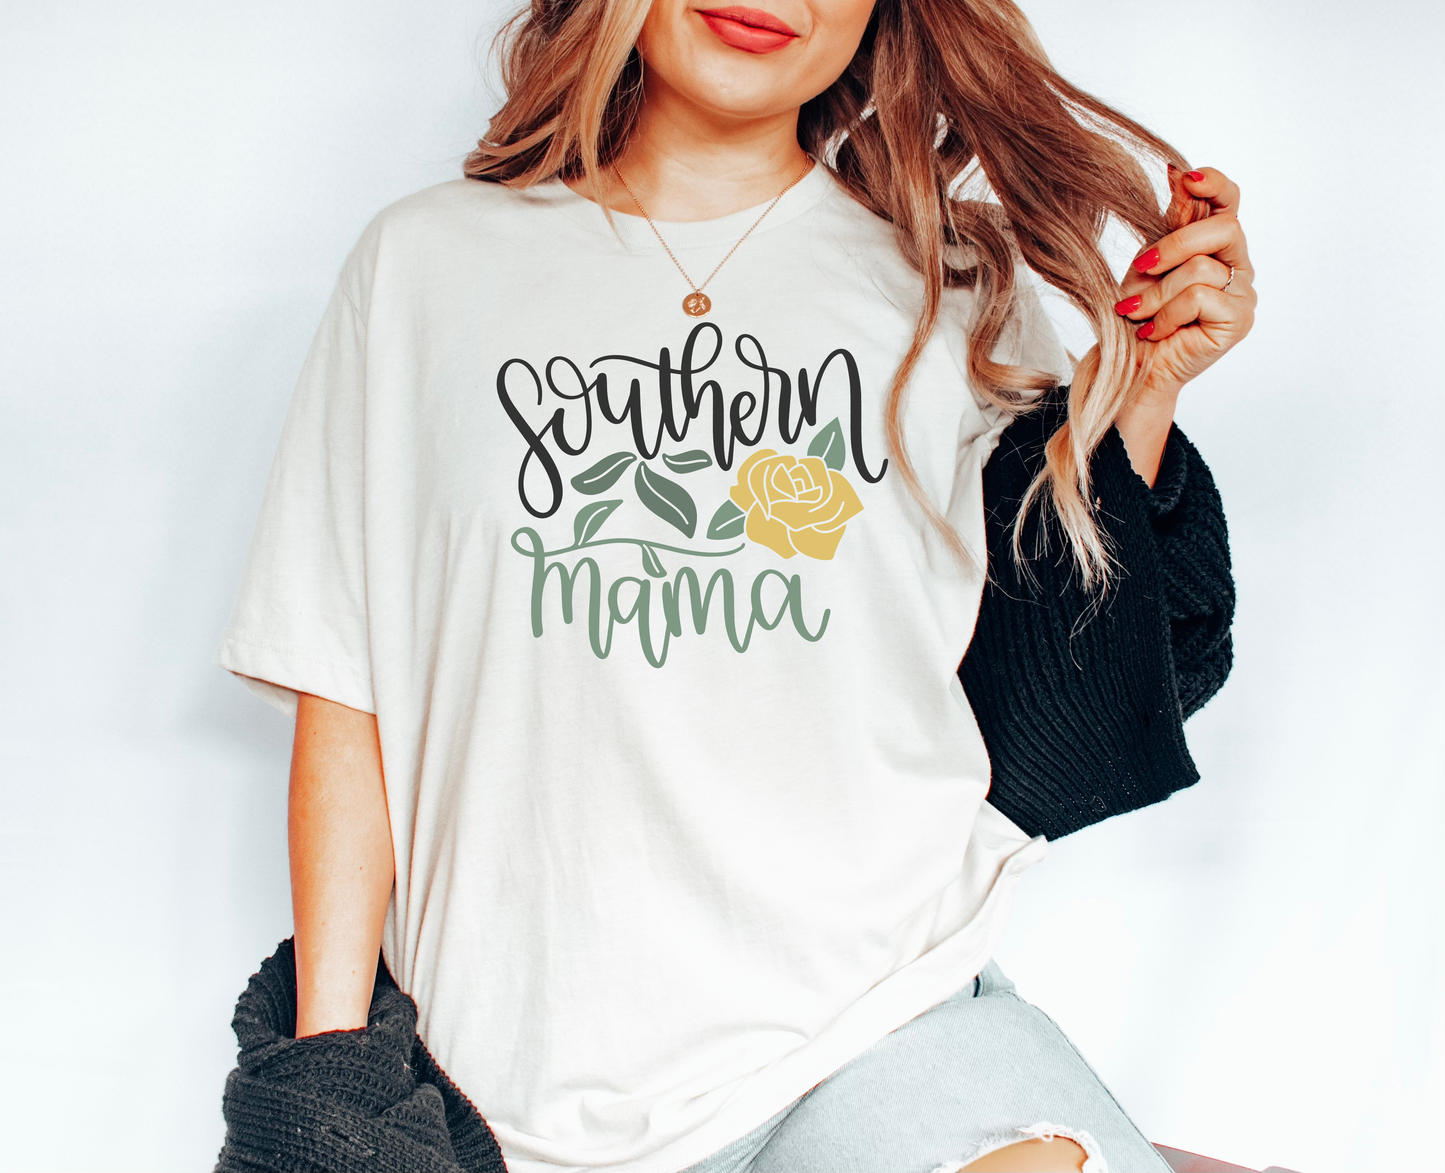 Southern Mama With Flower T-Shirt or Crew Sweatshirt